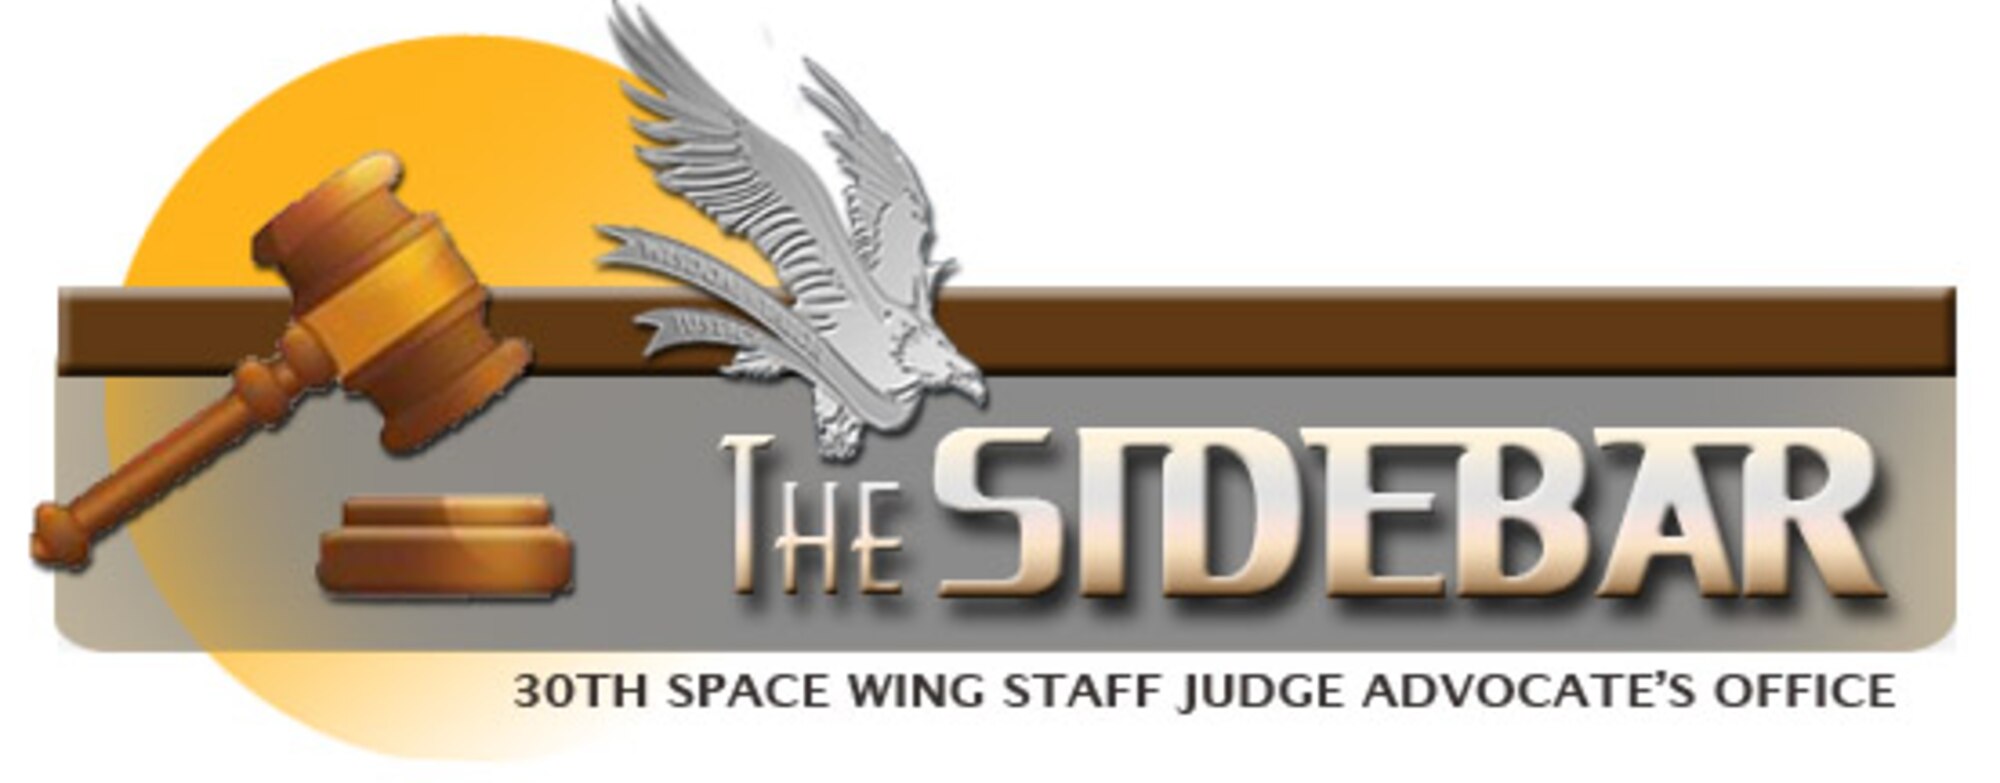 Graphic used for "The Sidebar" articles from the 30th Space Wing Staff Judge Advocate.(U.S. Air Force graphic/Caroline Lander)